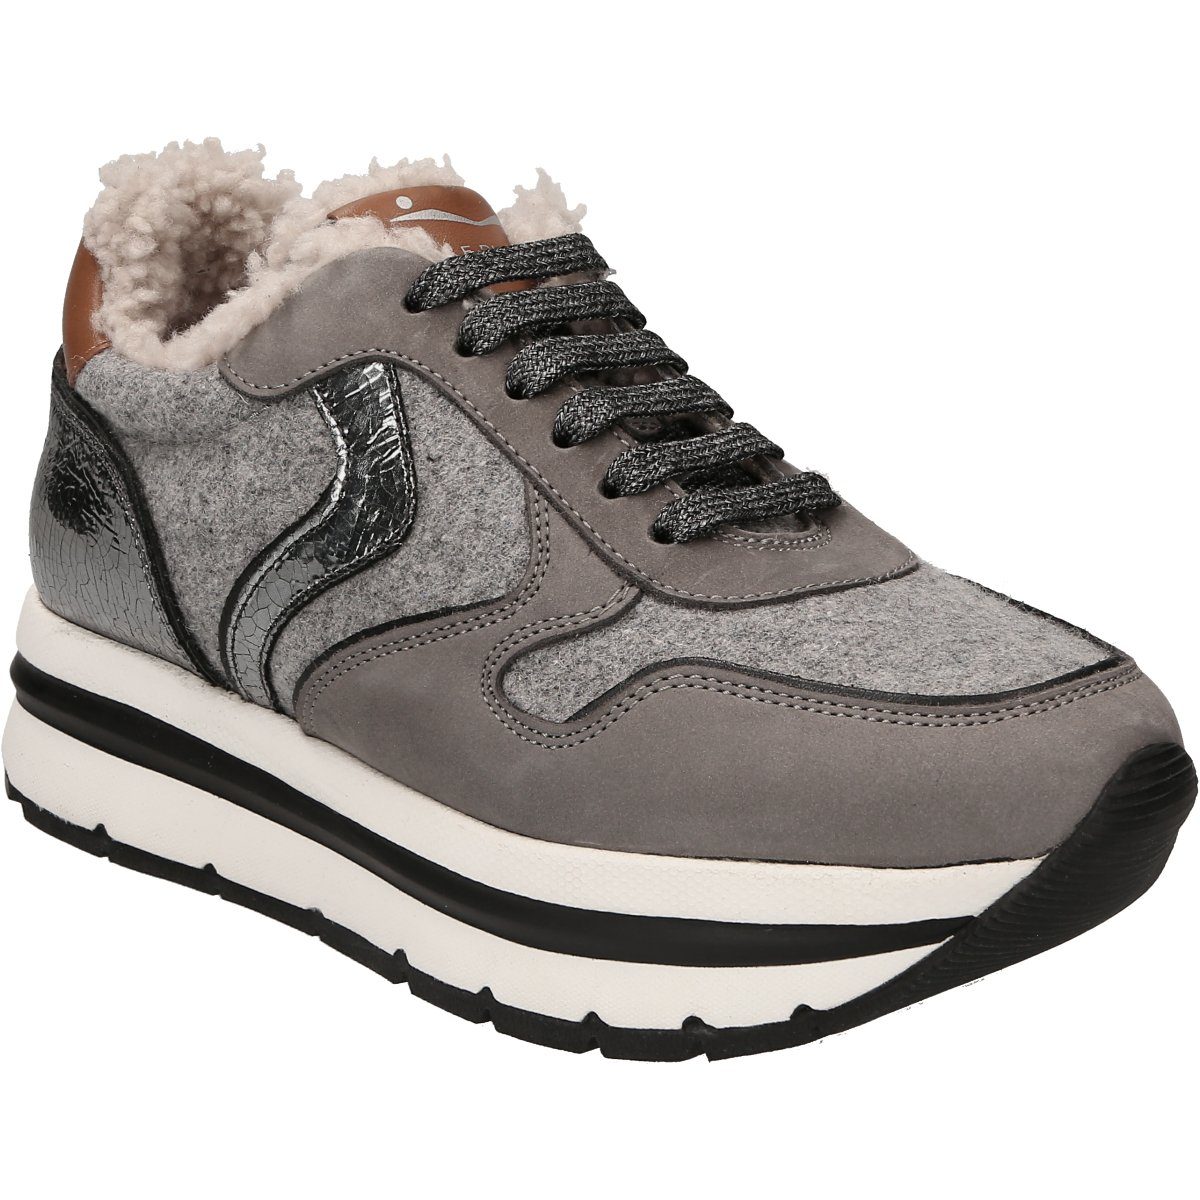 VOILE BLANCHE MAY FUR Sneaker, Obermaterial: Nubukleder online kaufen | OTTO